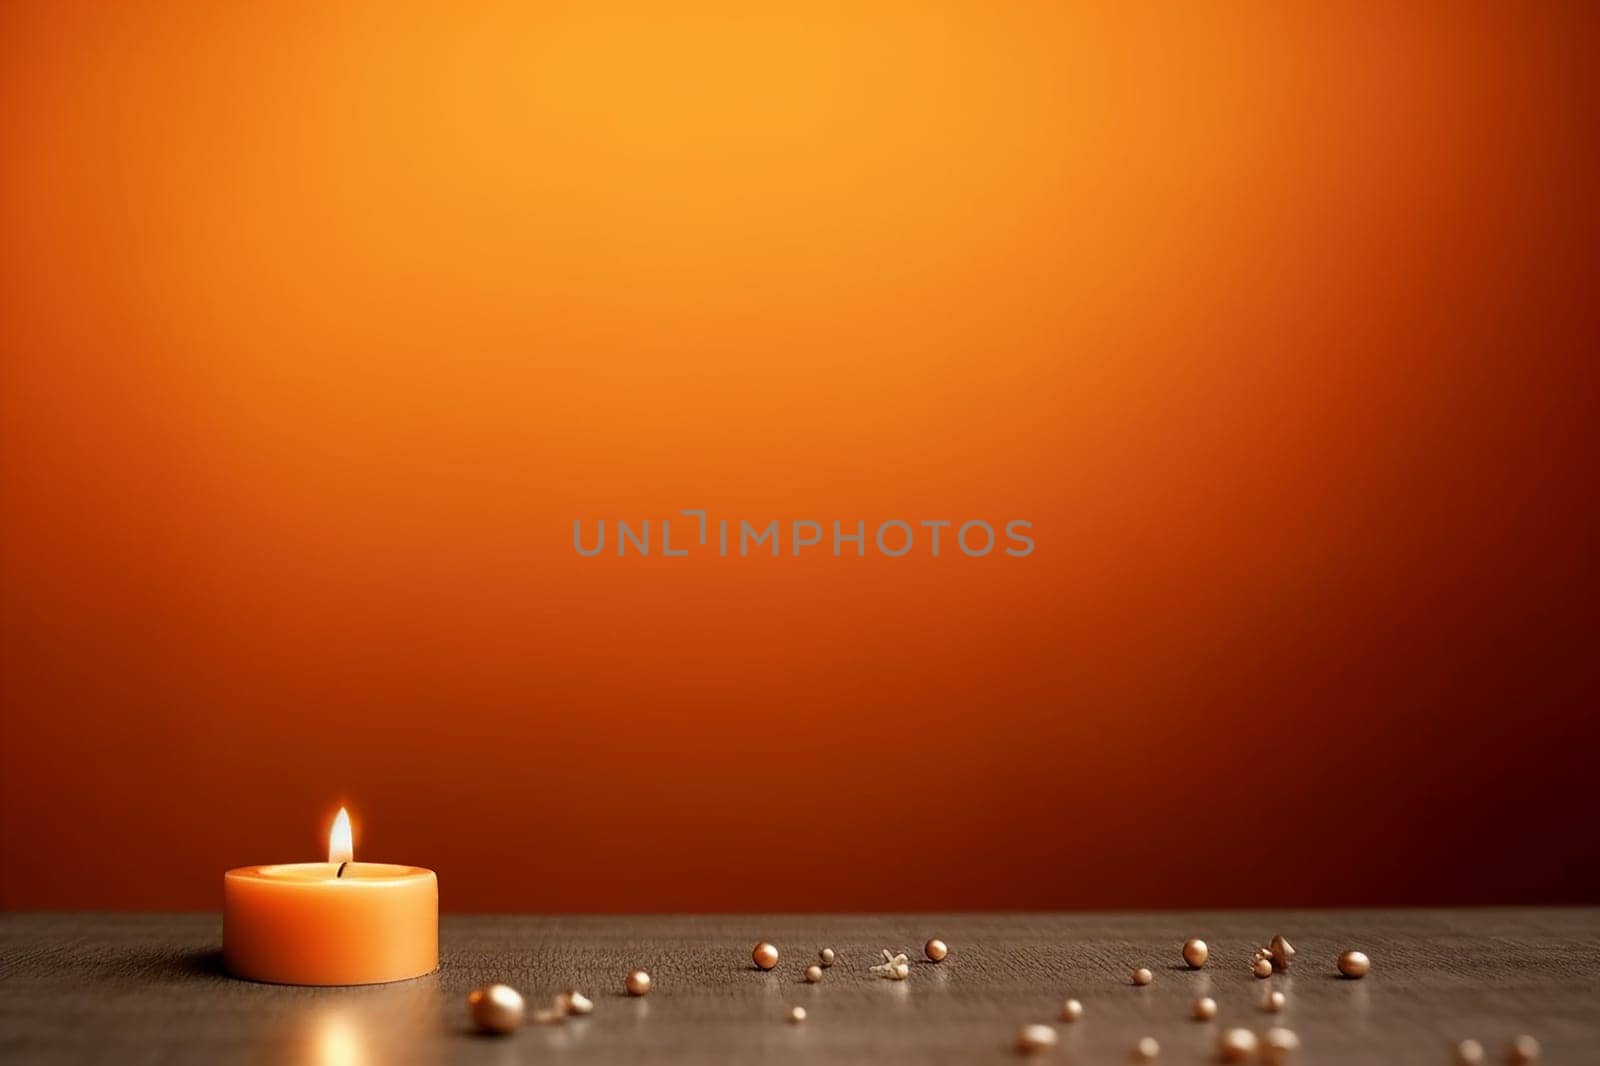 Single lit candle with small beads on a wooden surface against an orange backdrop. by Hype2art